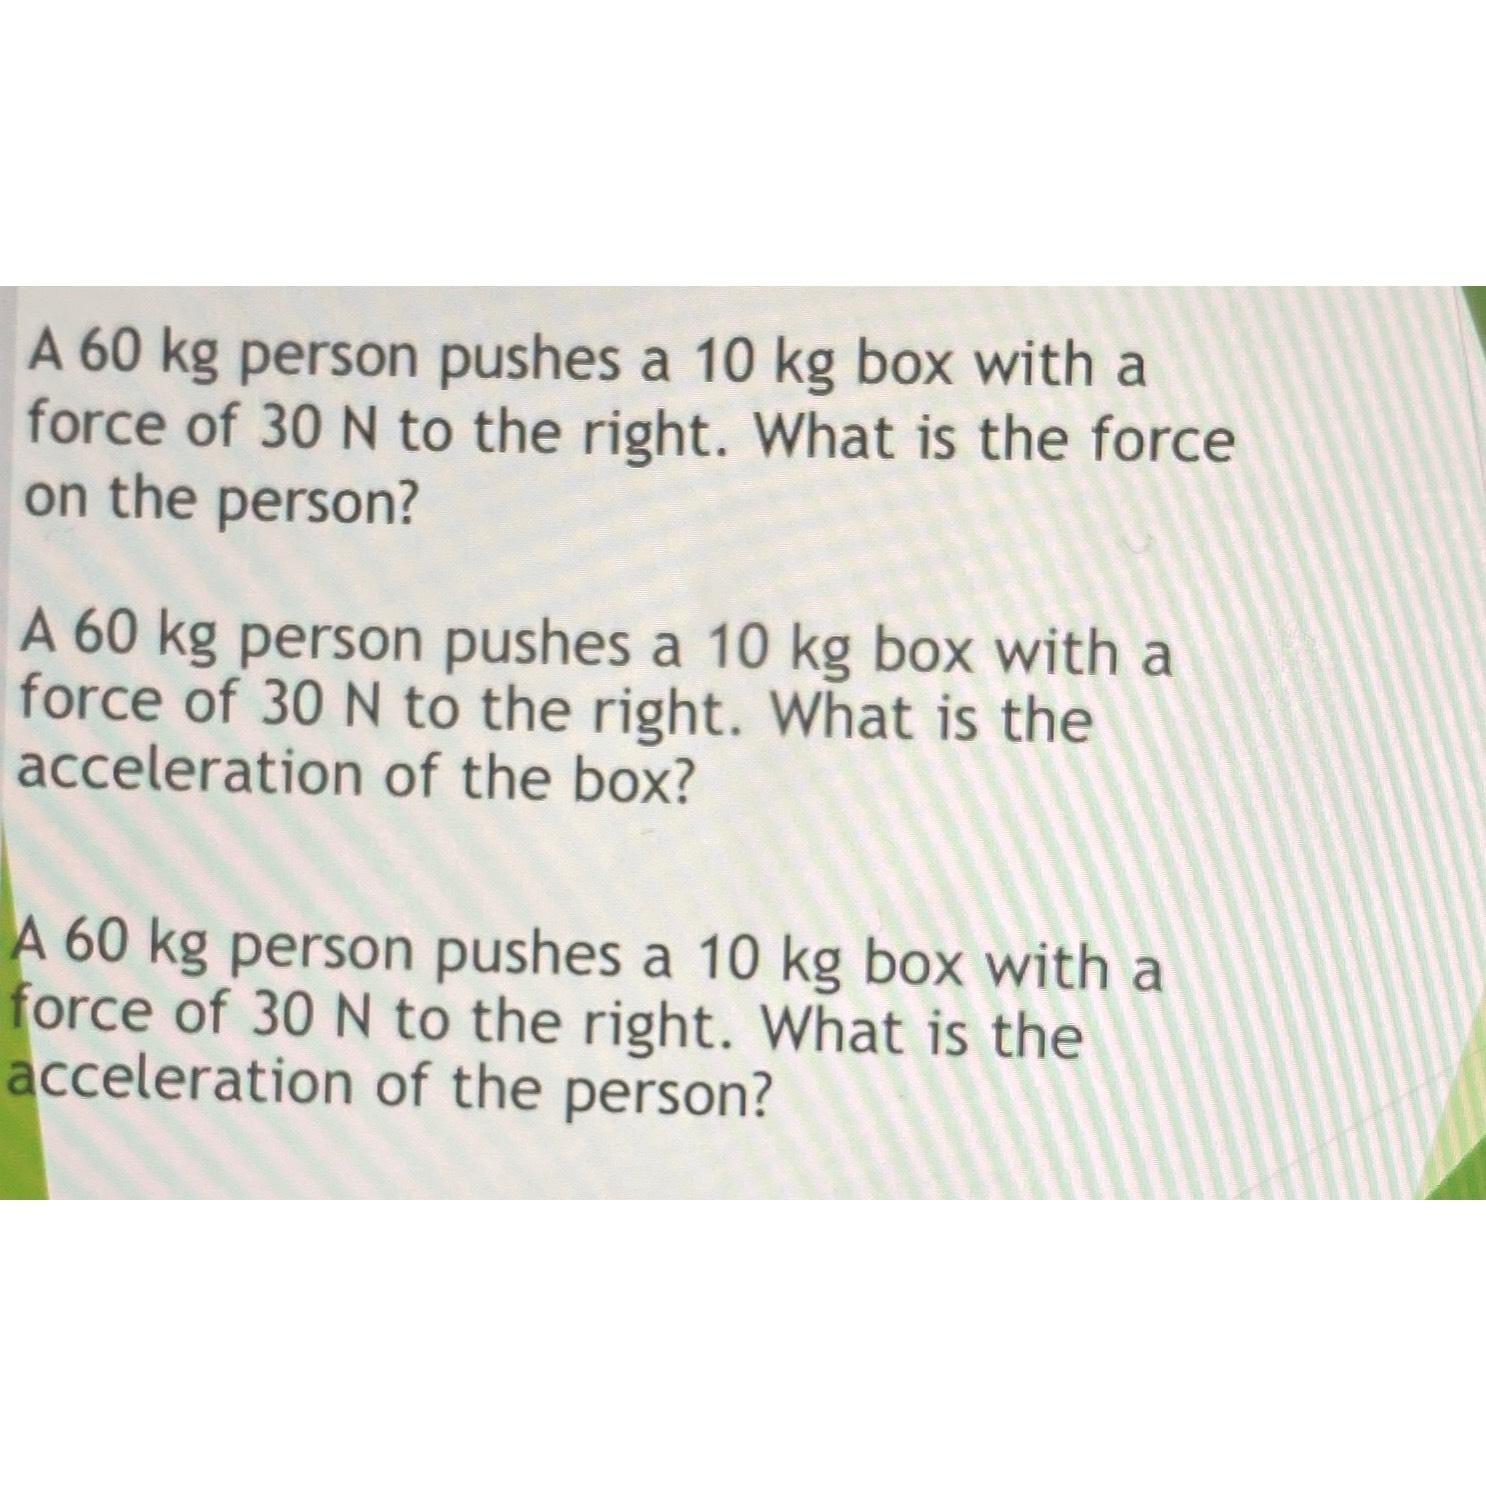 A 60 kg person pushes a 10 kg box with a force of 30 N to the right. What is the force on the person? A 60 kg